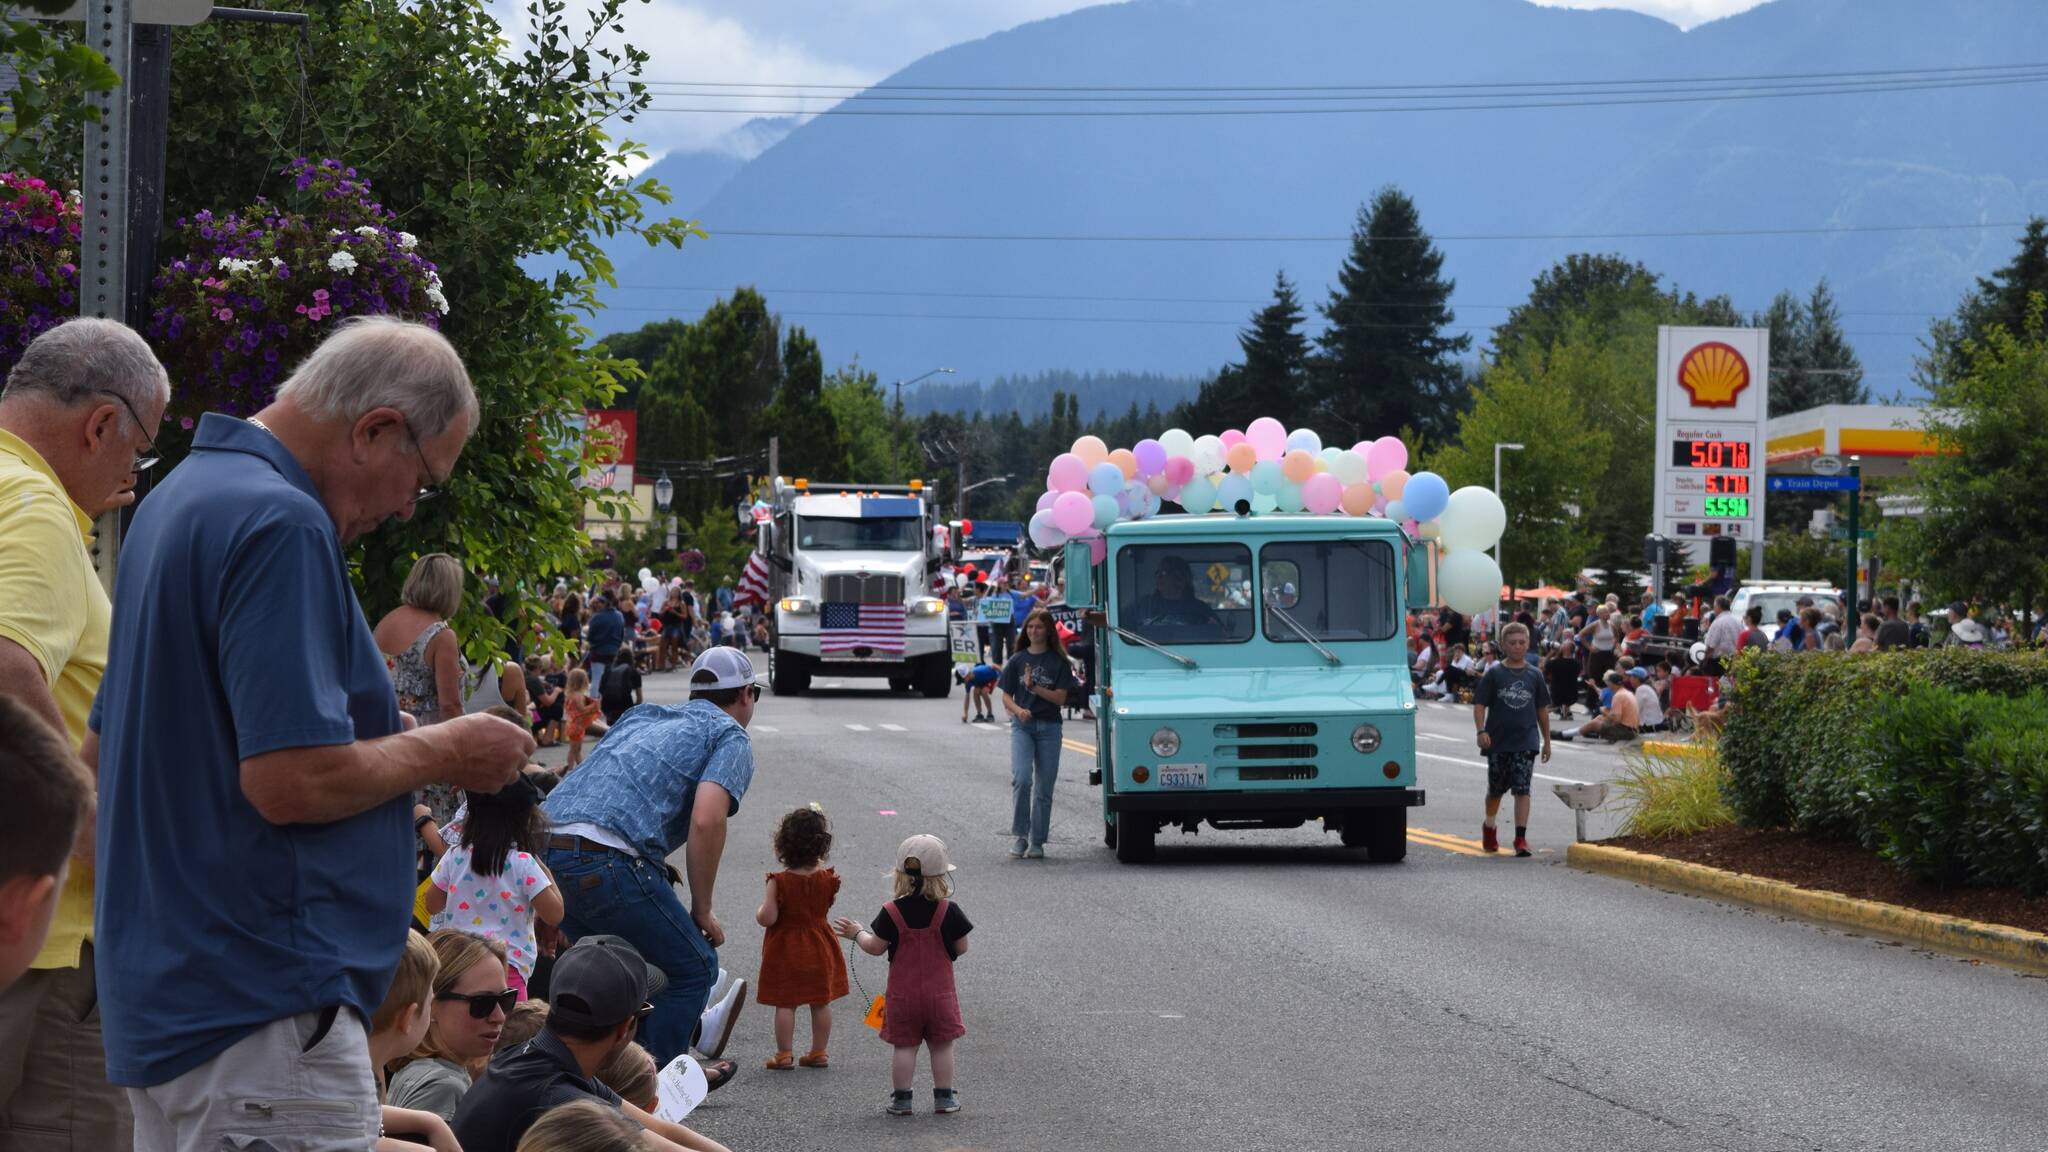 The crowd at Festival at Mt. Si watch an ice cream truck approach during the Grand Parade. Photo Conor Wilson/Valley Record.